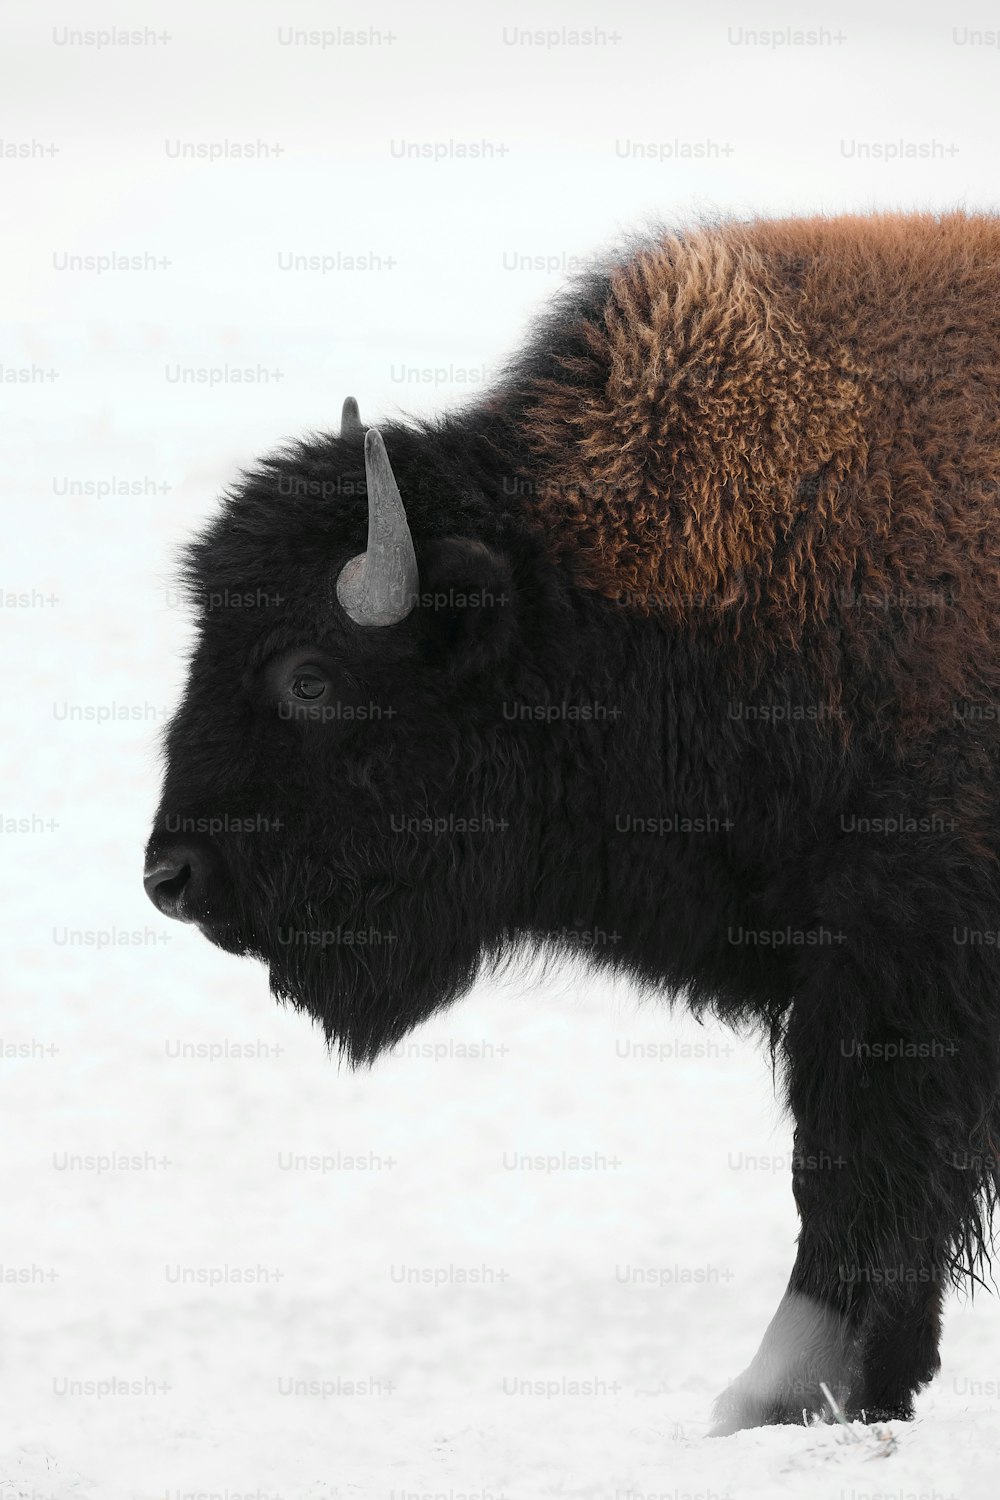 a bison with horns standing in the snow